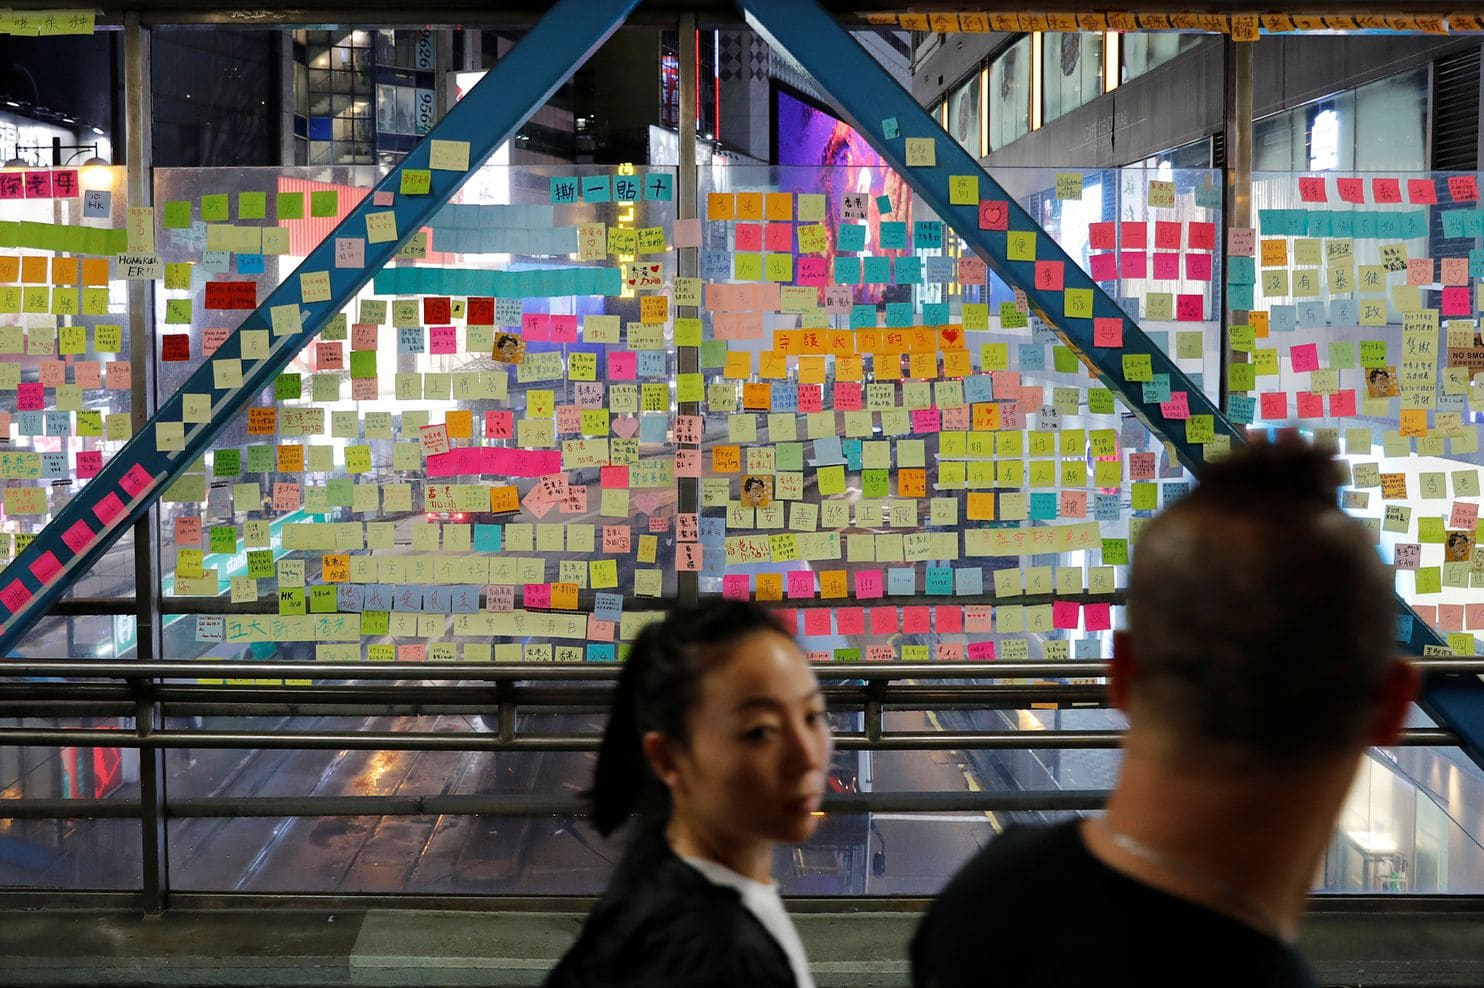 Sticky notes with messages backing protesters and their demands cover a “Lennon Wall” at Causeway Bay in Hong Kong. (Tyrone Siu/Reuters)